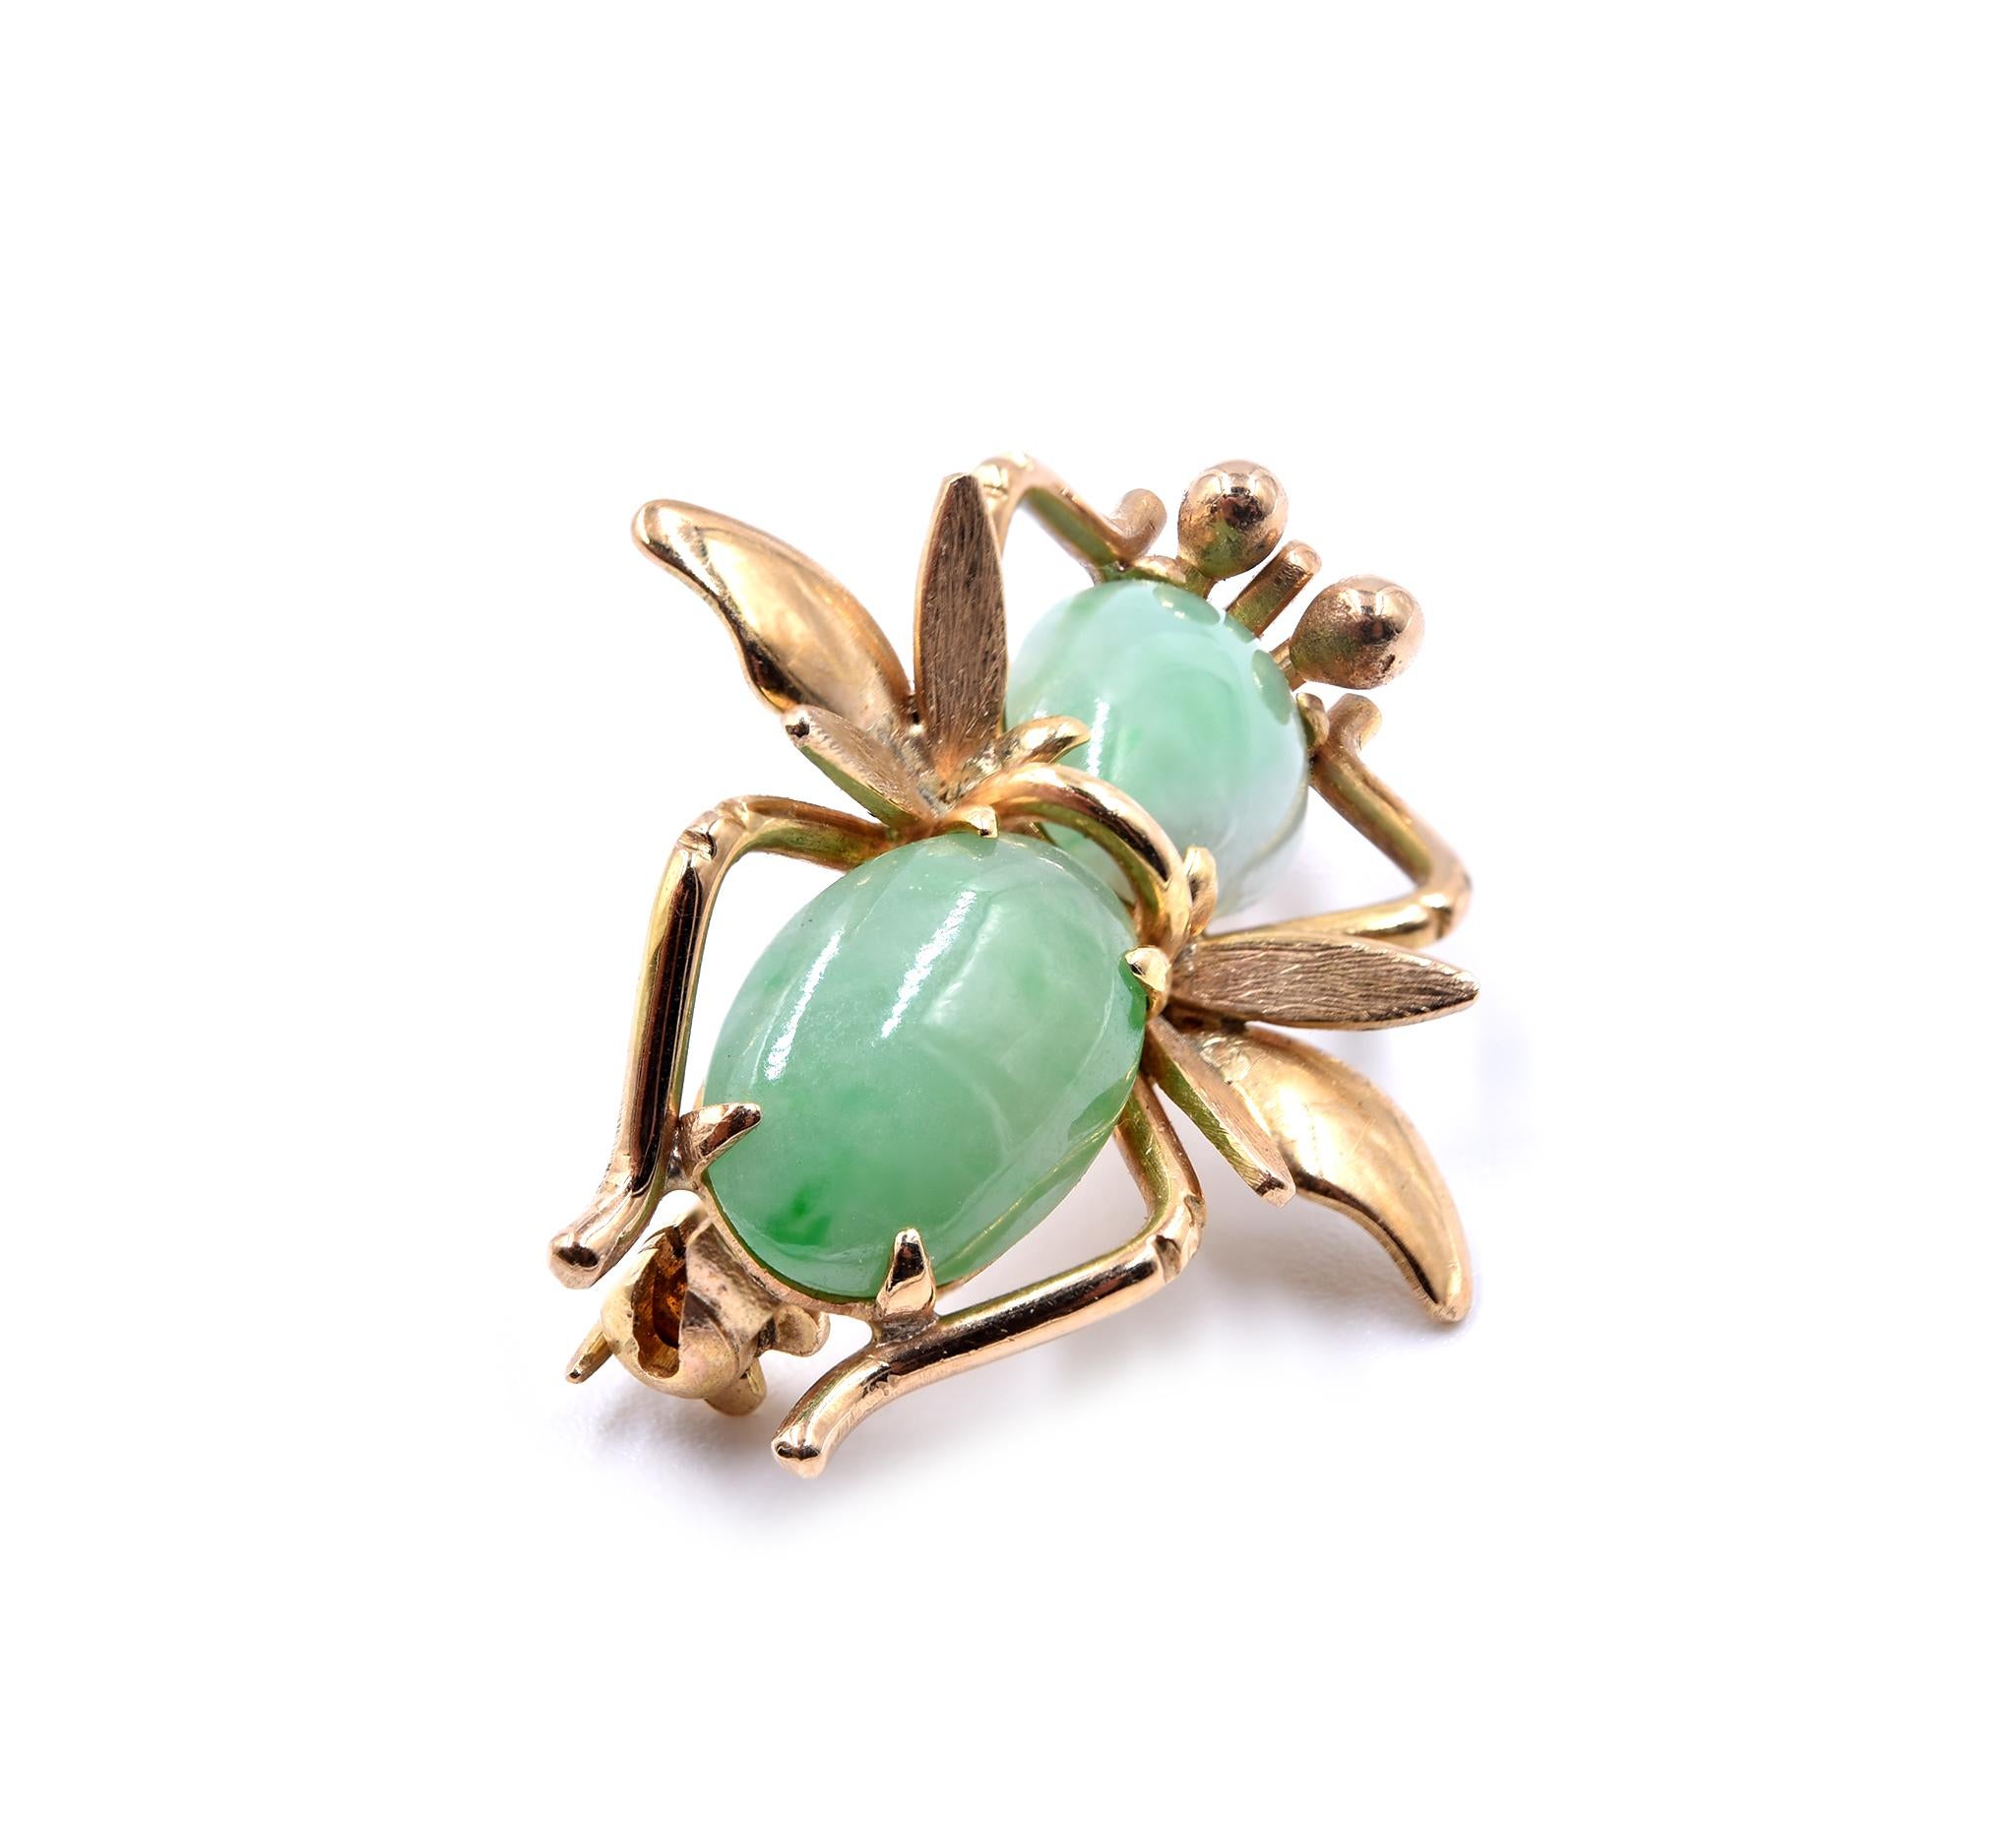 Designer: custom design 
Material: 14k yellow gold
Gemstone: Jade
Dimensions: pin is approximately 20.44mm by 24.35mm
Weight: 3.28 grams

